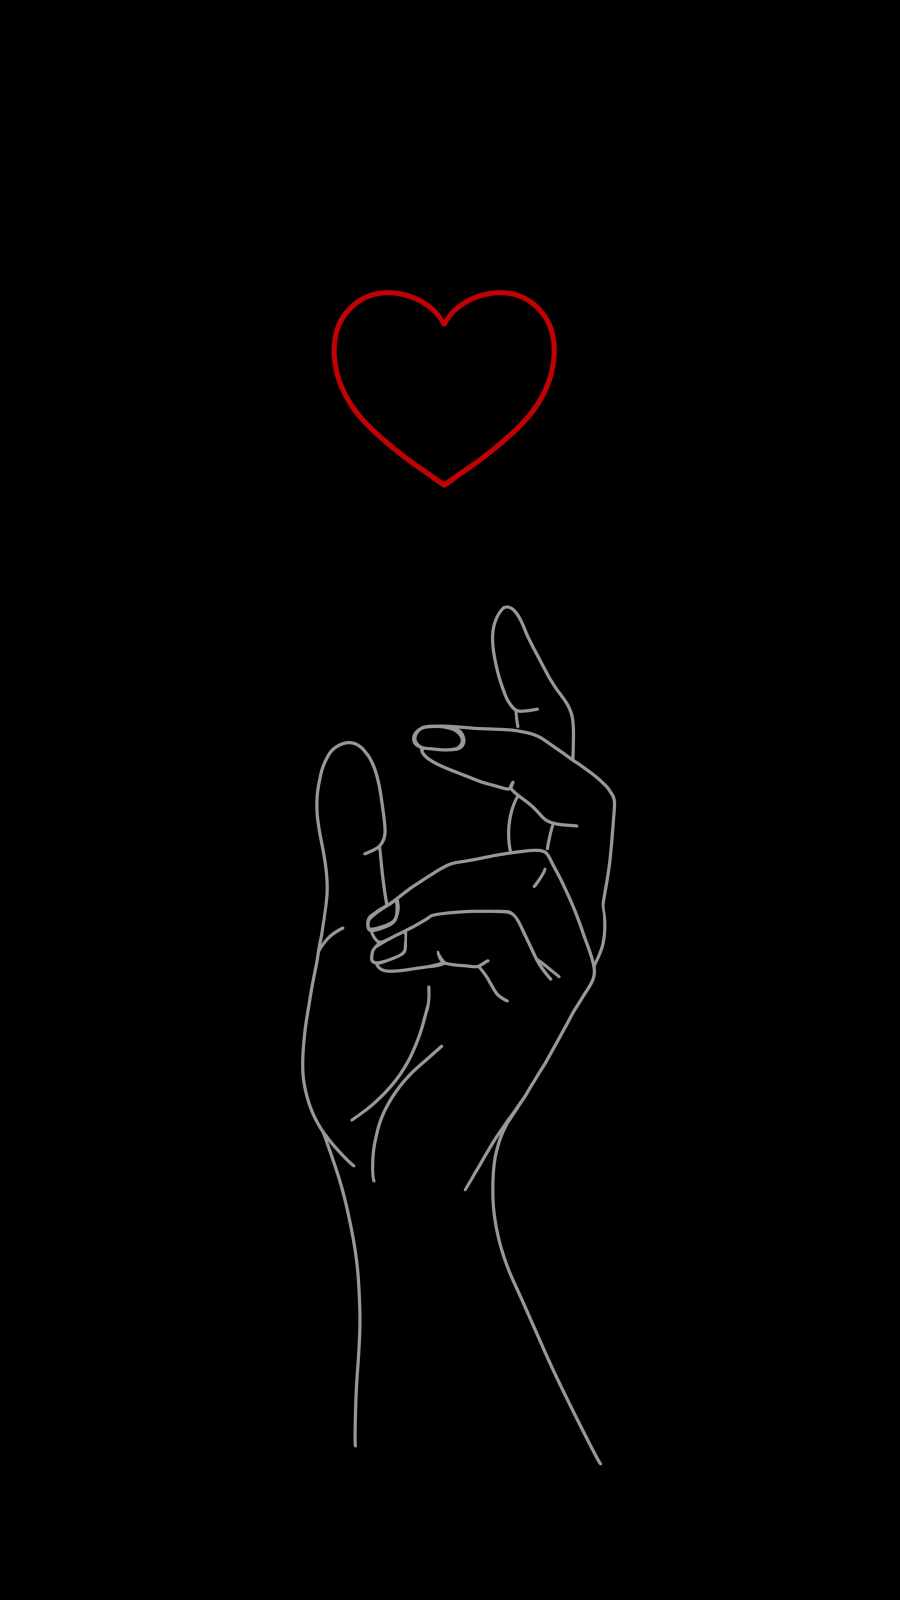 Find Love IPhone Wallpaper - IPhone Wallpapers : iPhone Wallpapers